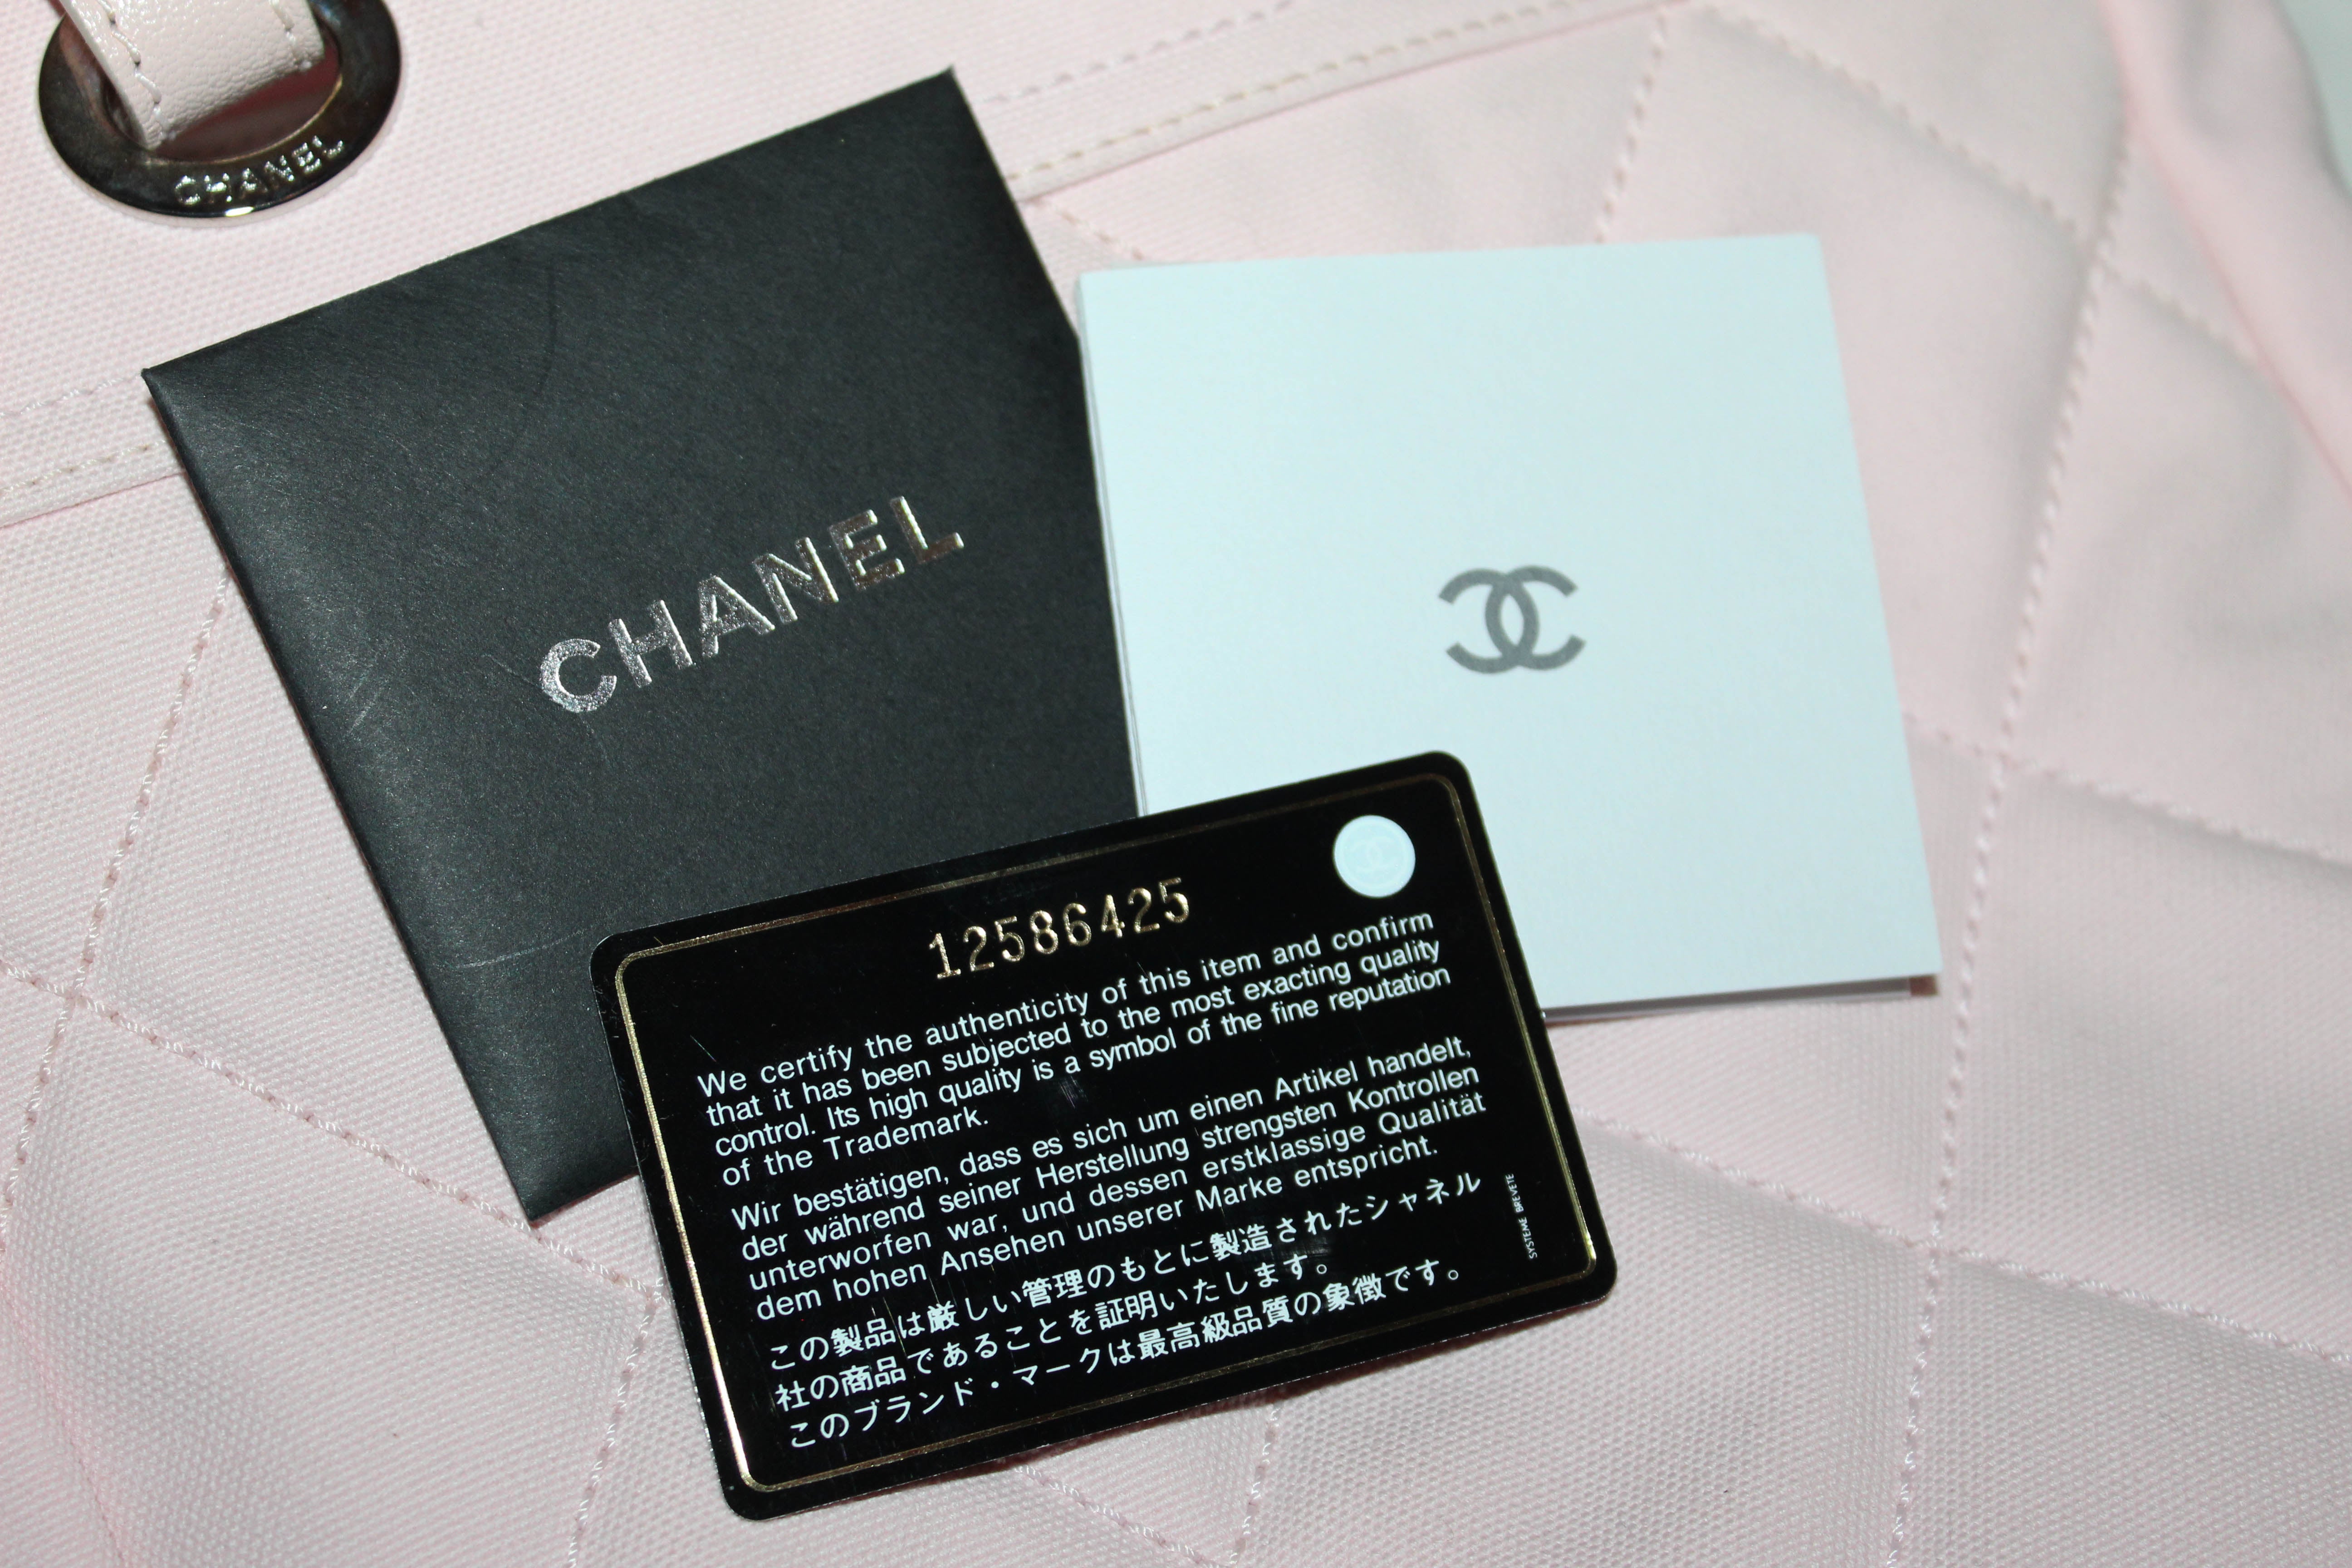 Authentic Chanel Pink Biarritz Canvas Leather Tote